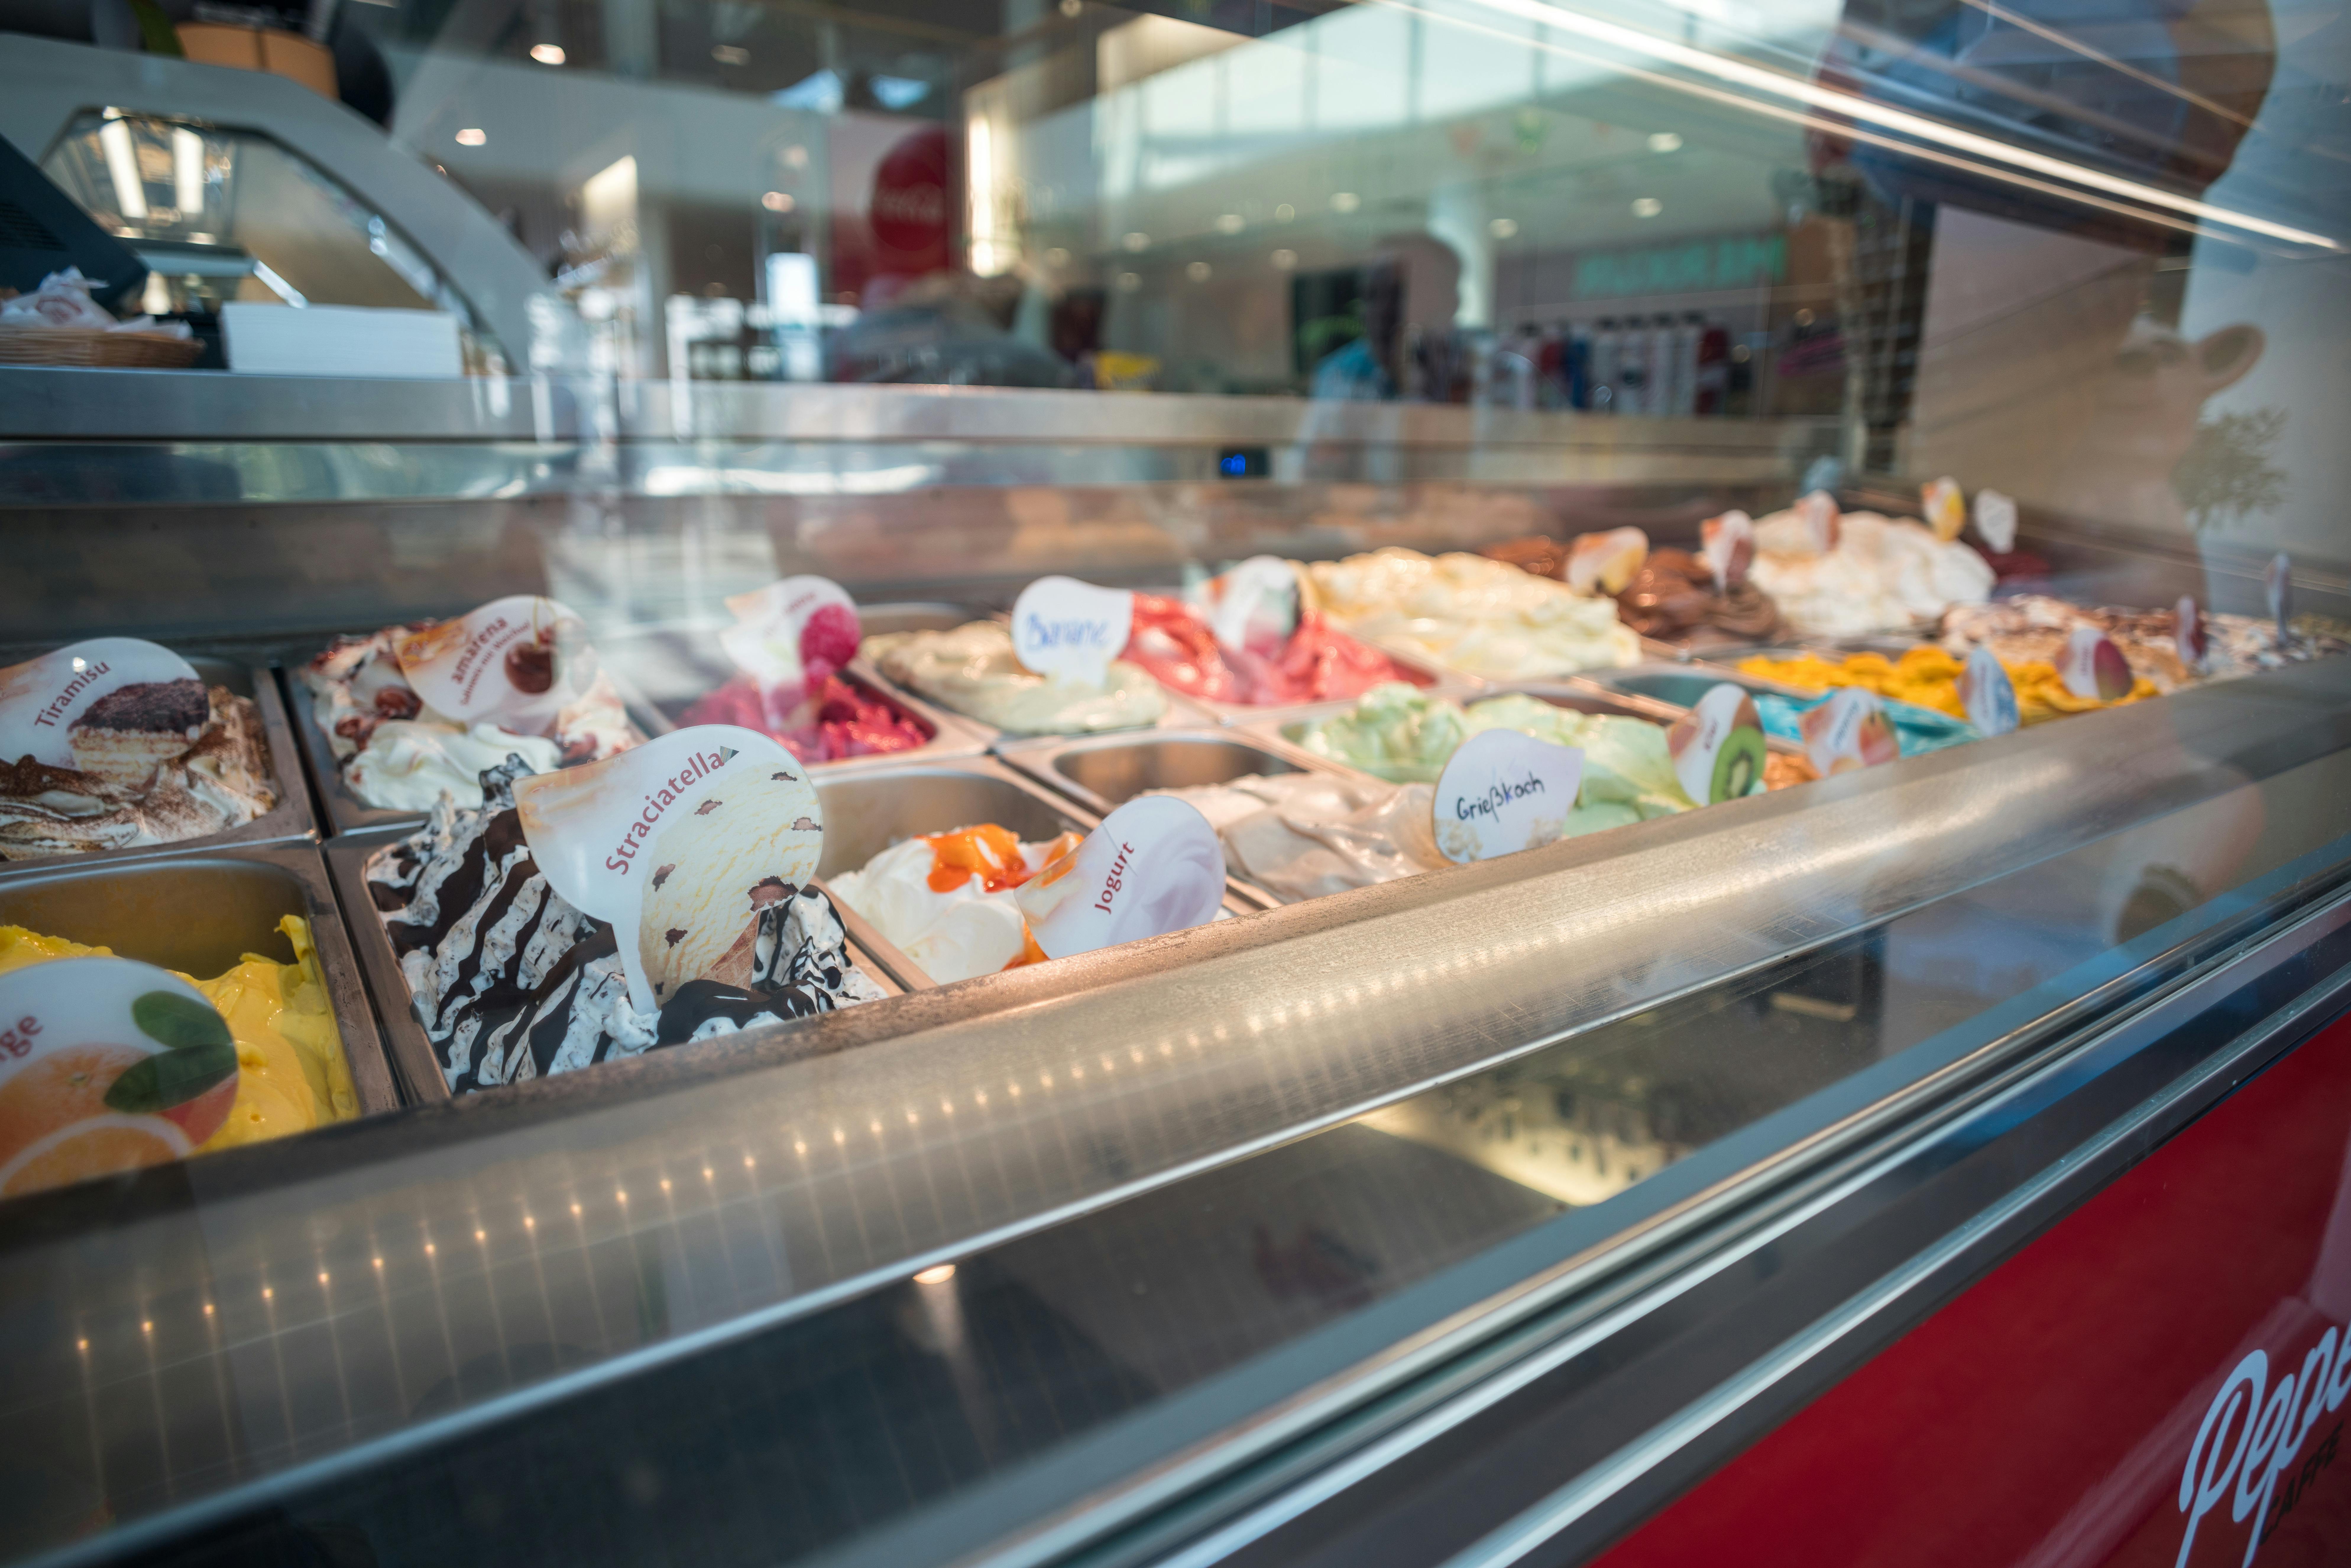 Image for illustration purposes only. Ice cream on display in a shop | Source: Pexels